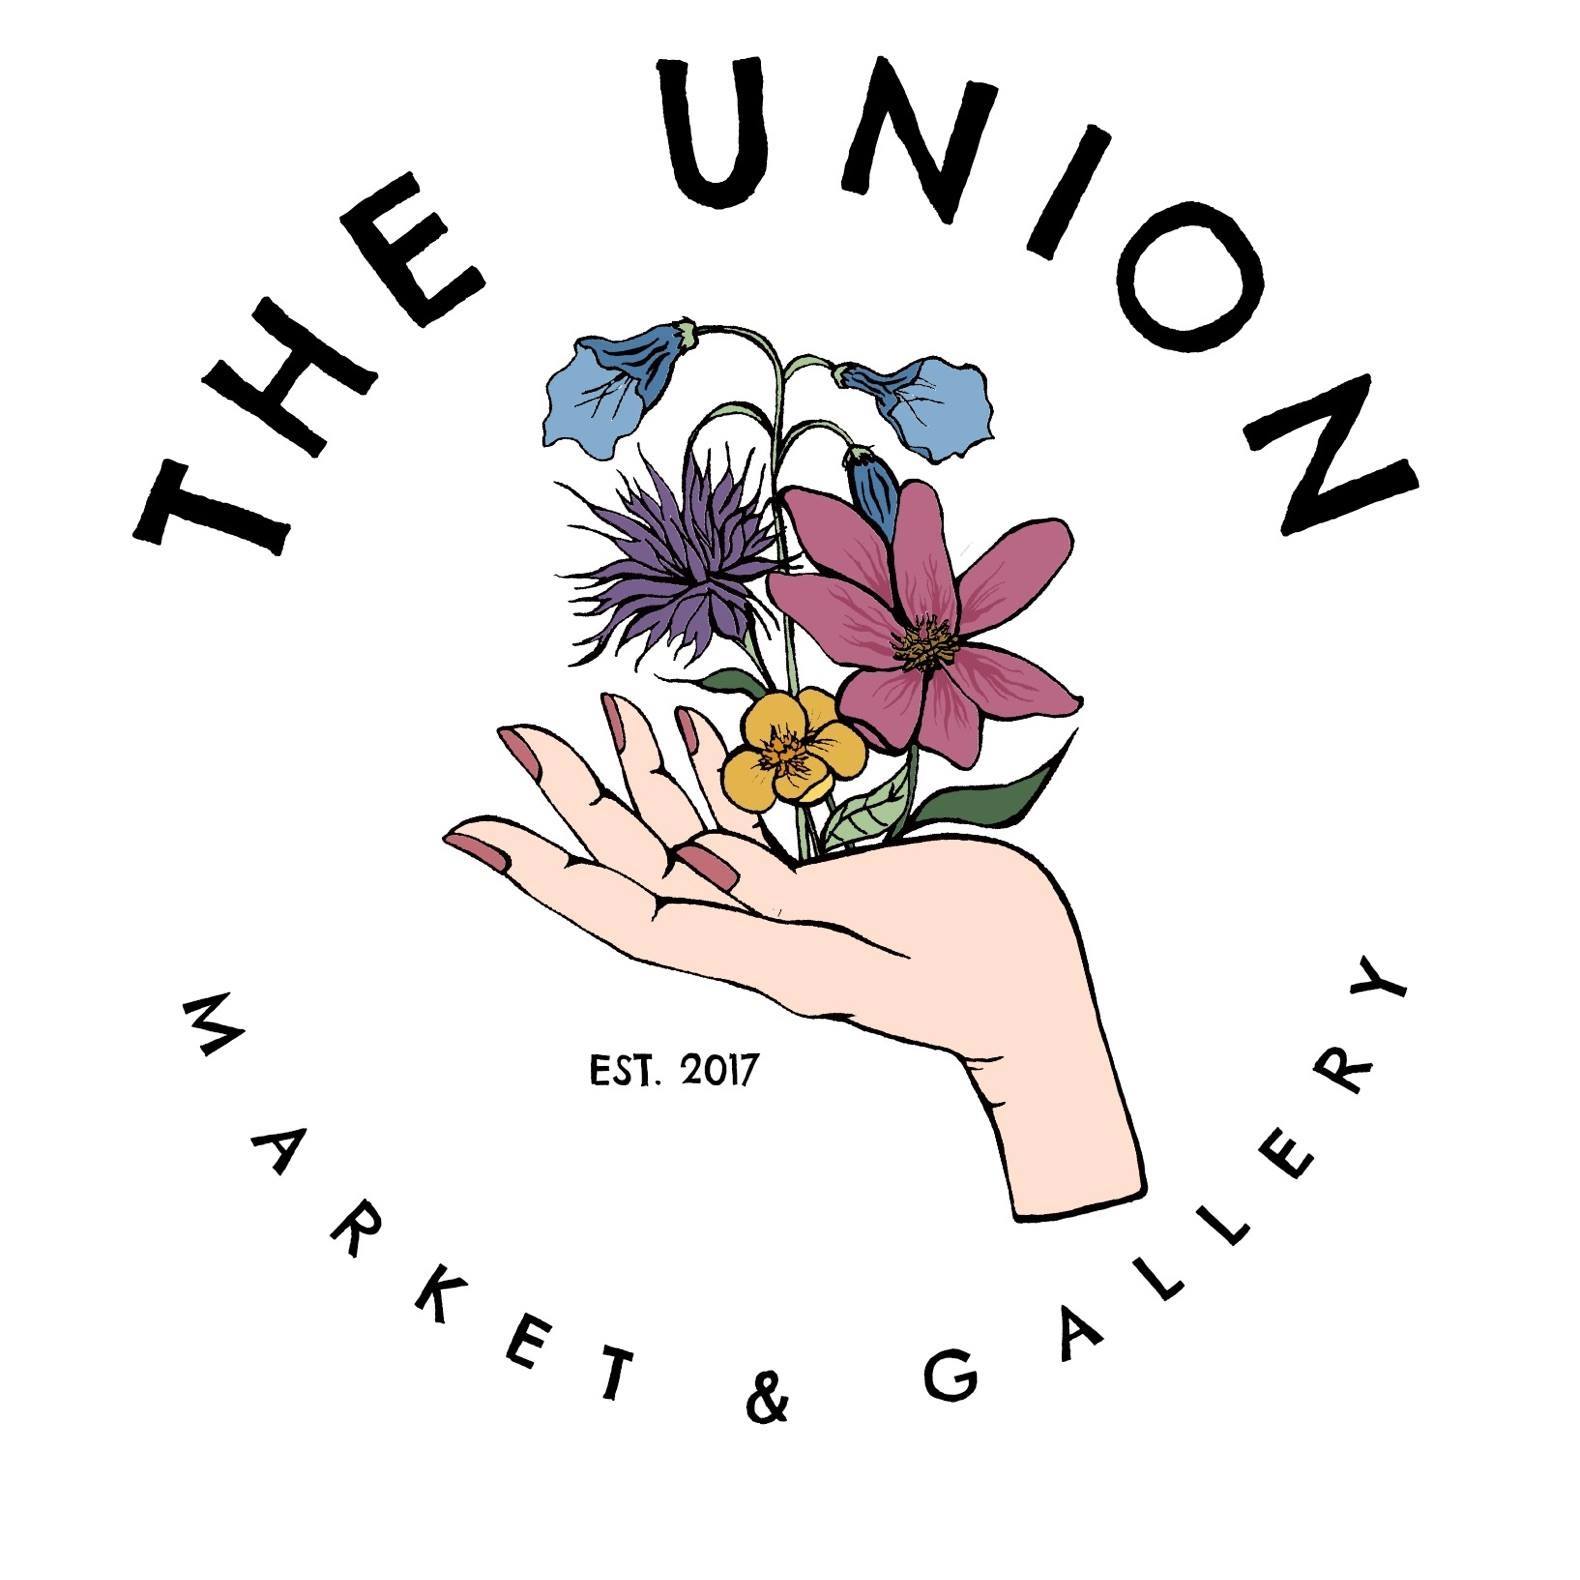 The Union Market & Gallery